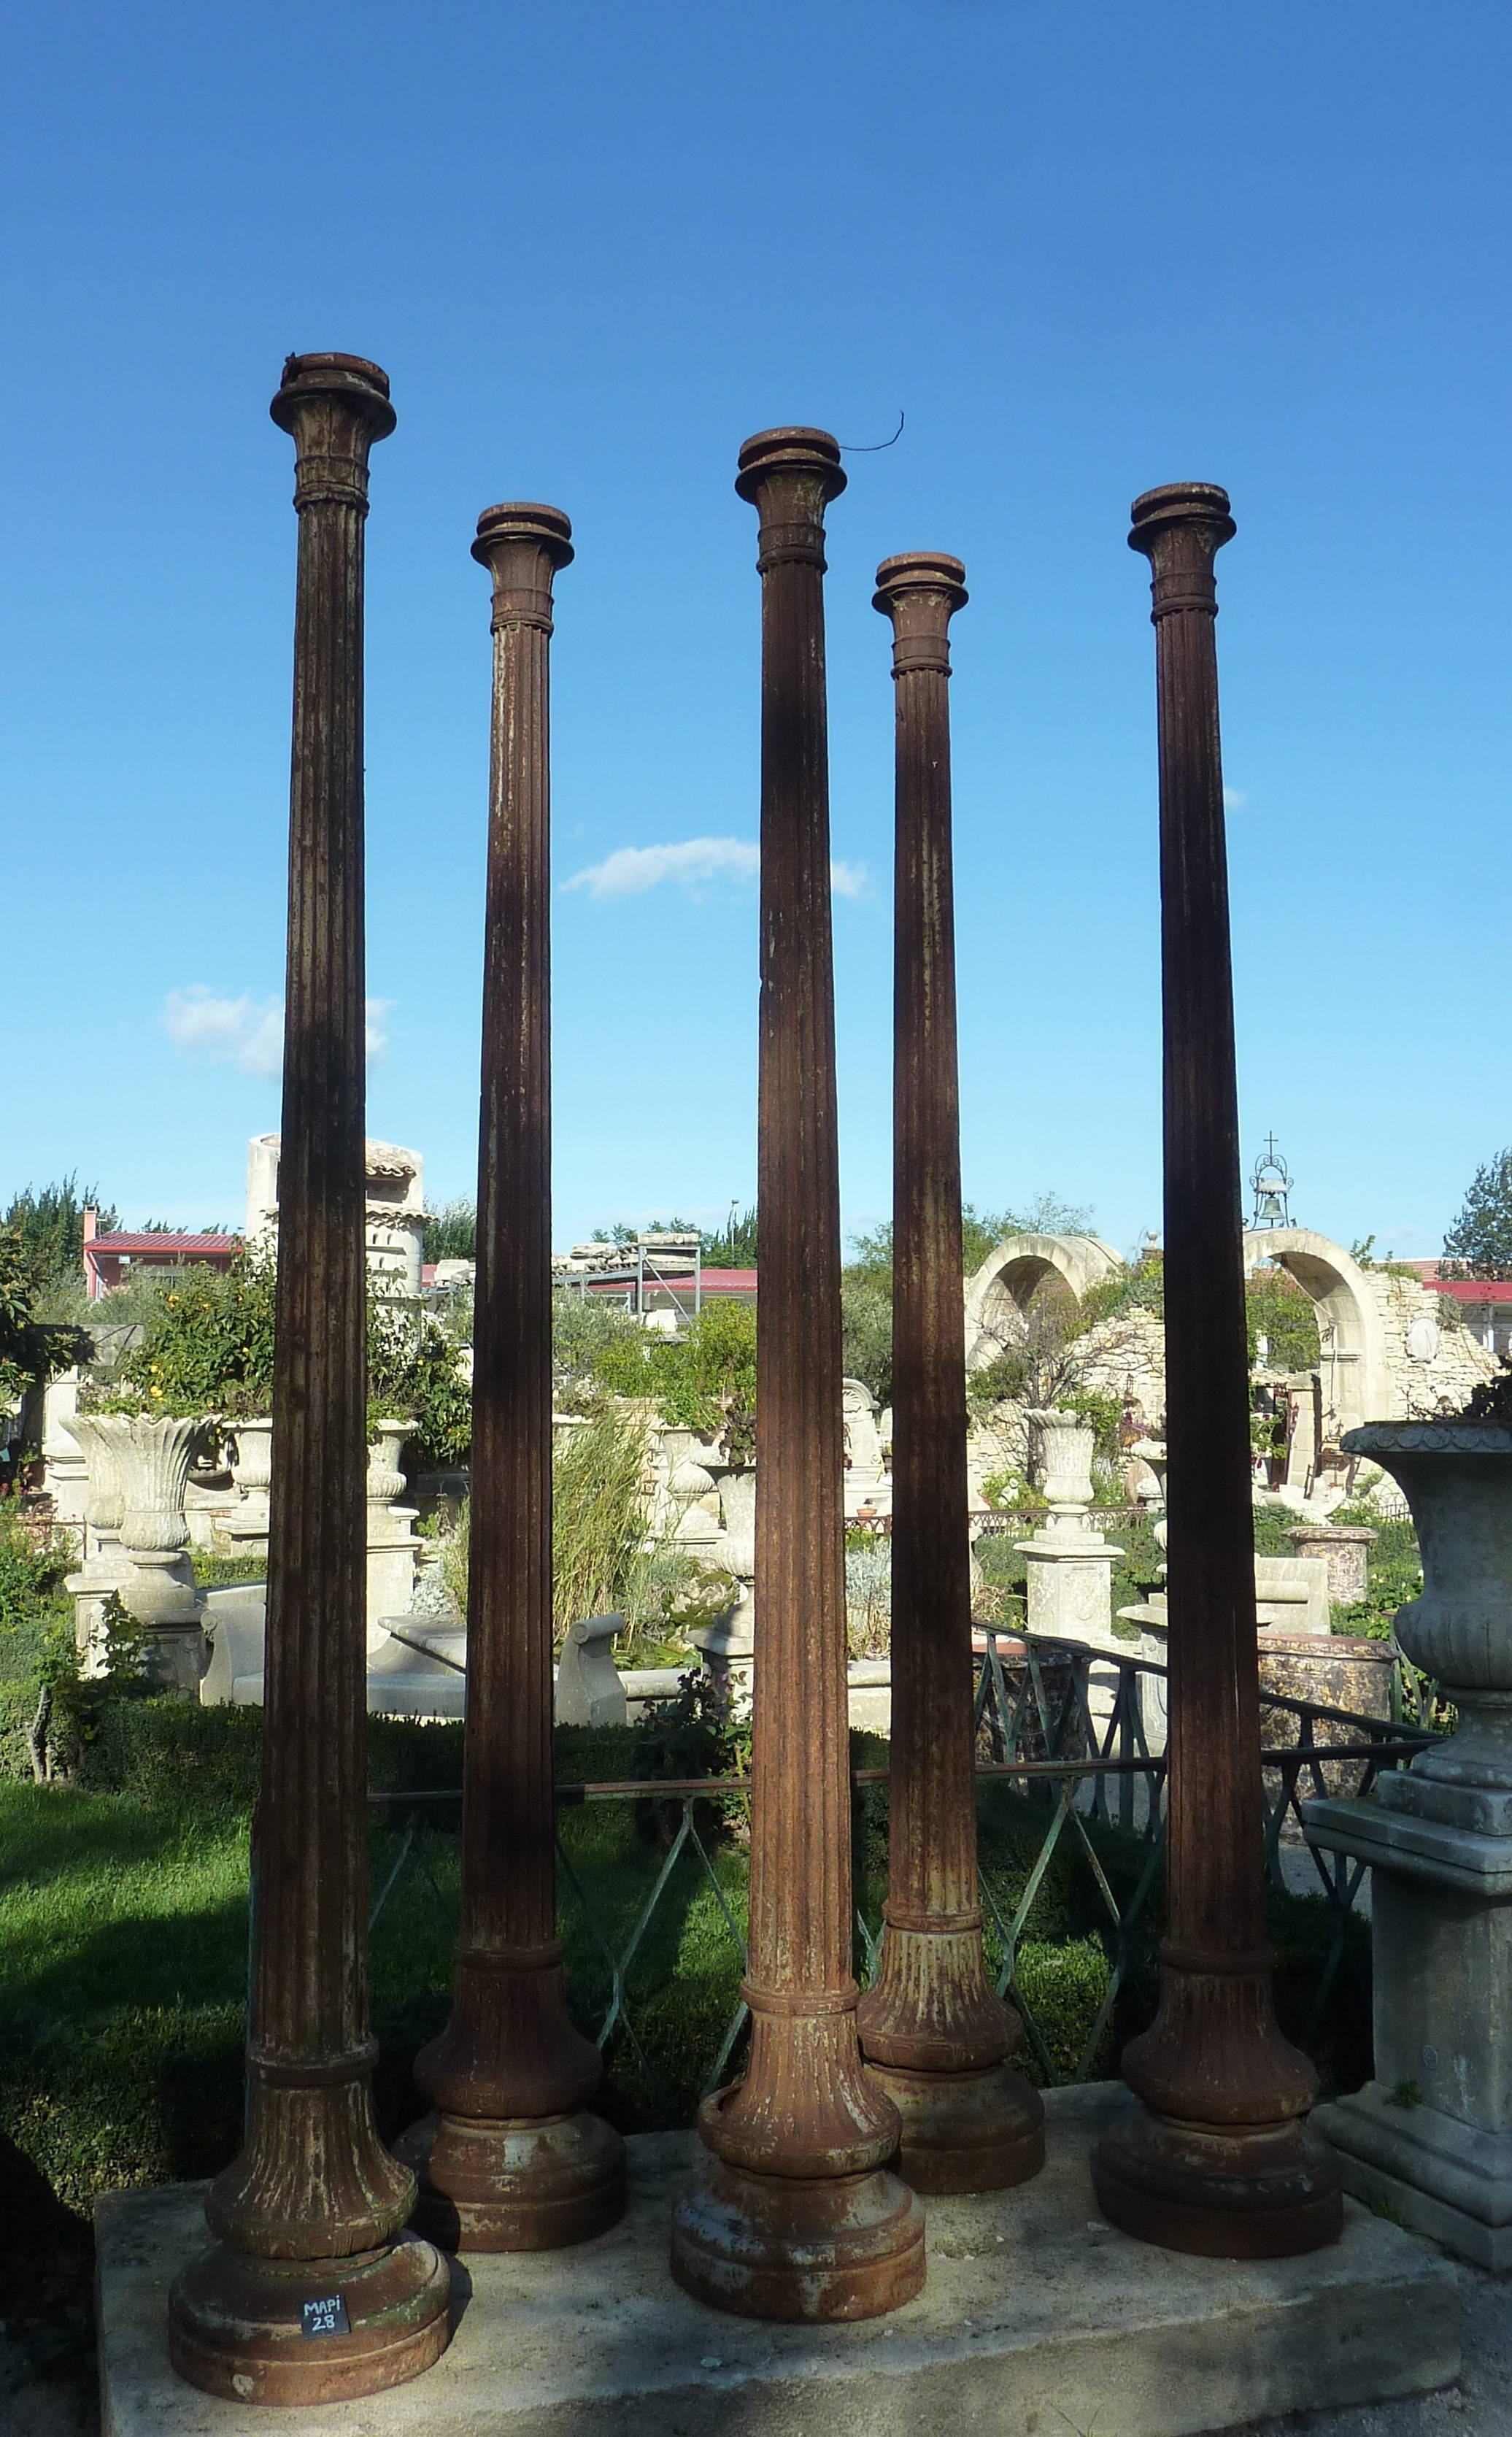 This real antique Doric column dates back to the 19th century. Made of cast-iron, the hollowed column features a finger-fluted body. The upper part is beautifully decorated with a Bolection style collar. The base of this column is larger and